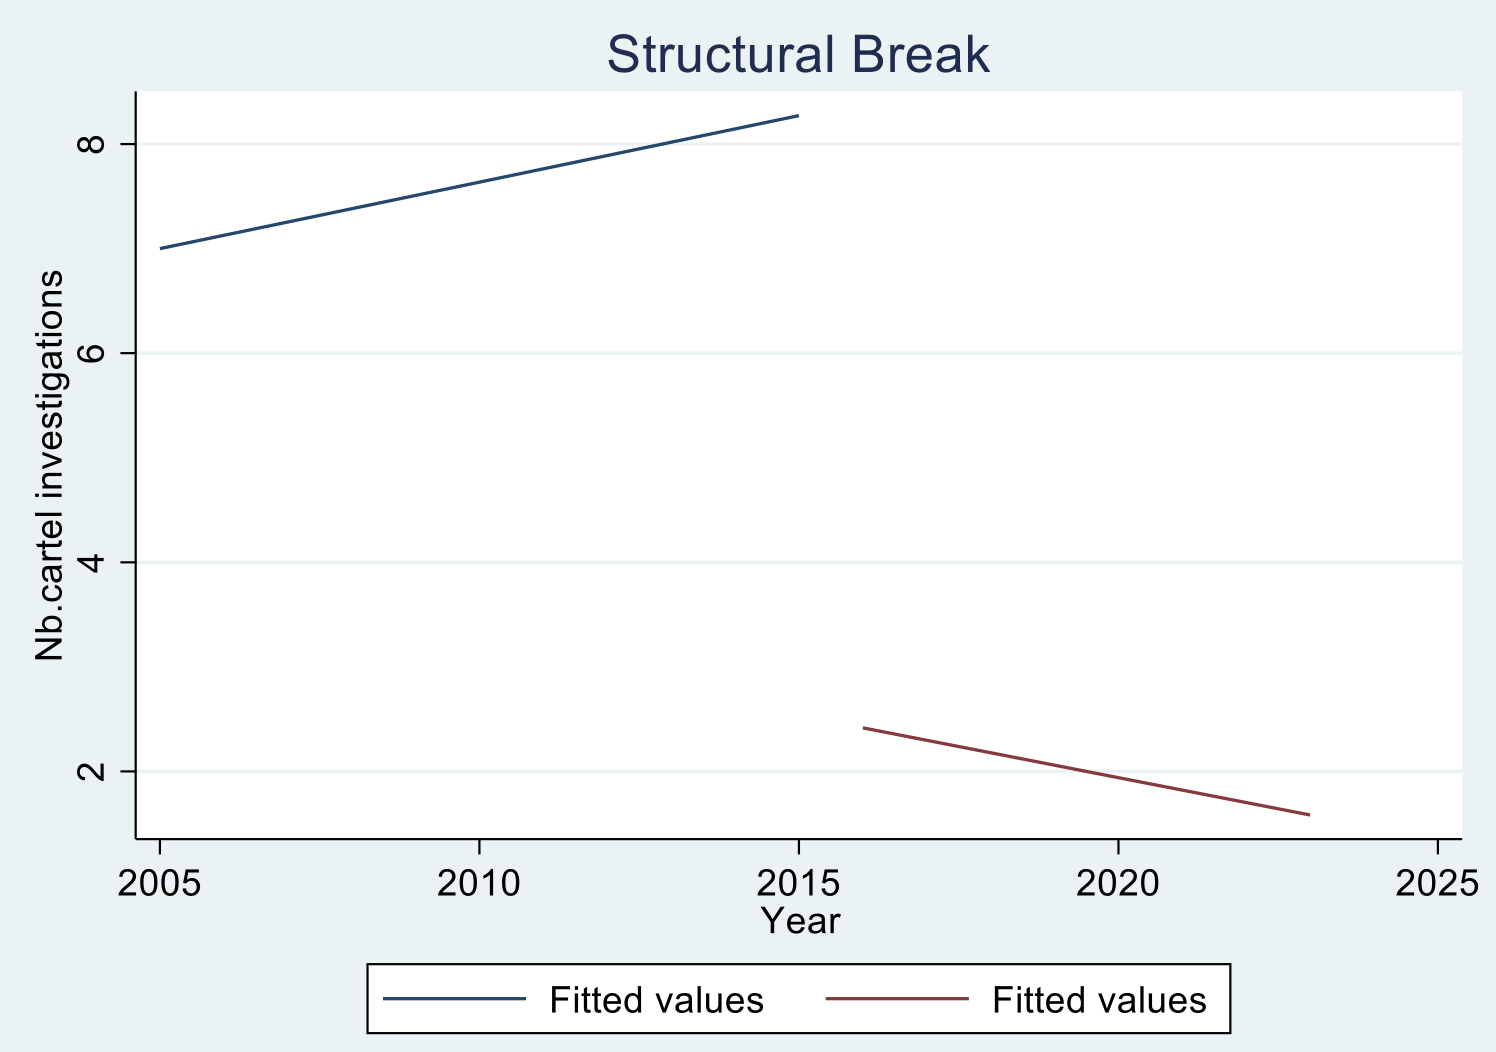 Figure 2 Linear trend of the number of investigations by the European Commission in 2005-2023, fitted values around the structural break (2016)